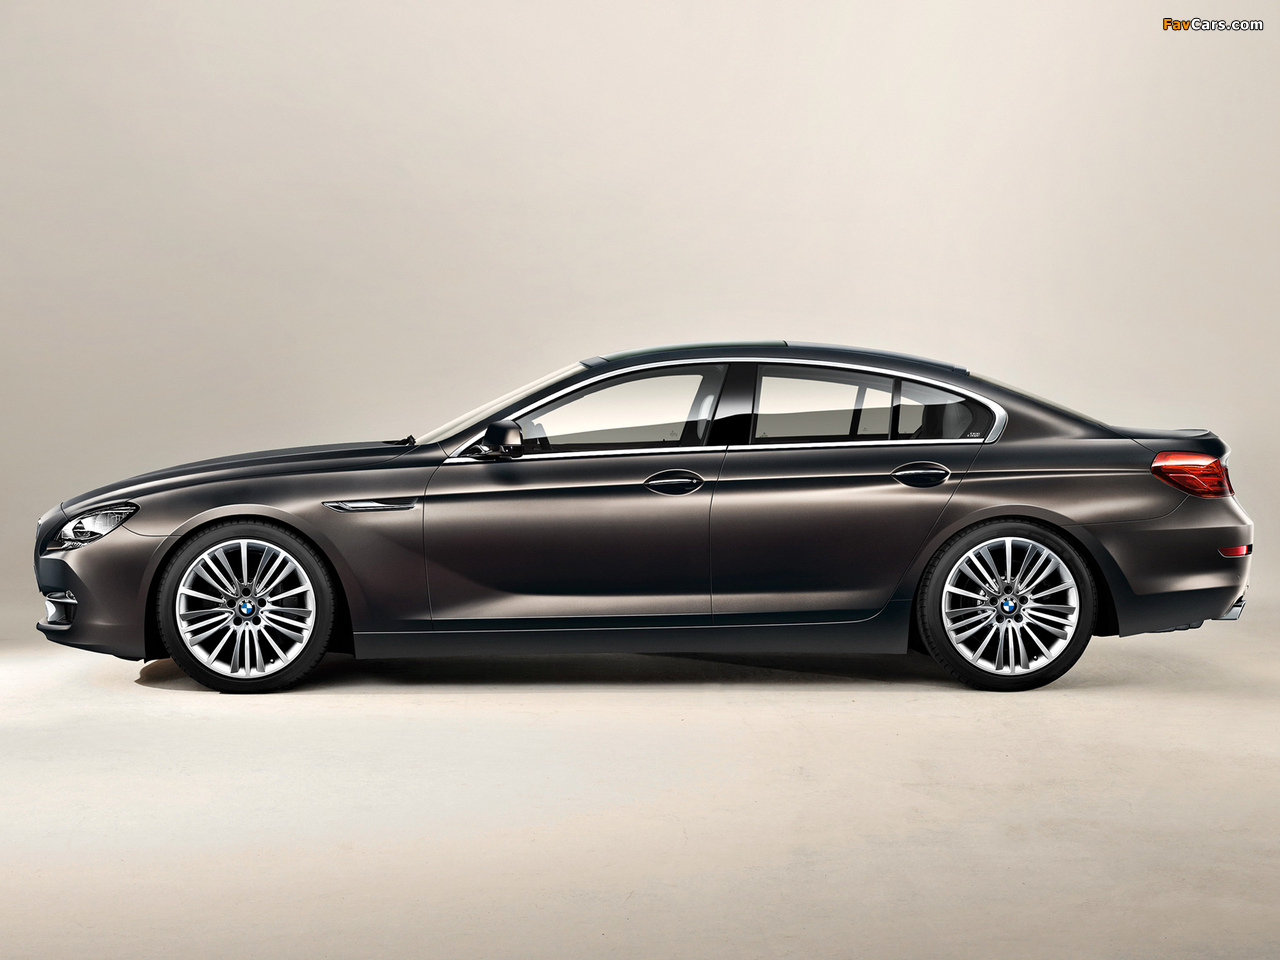 BMW 650i Gran Coupe (F06) 2012 pictures (1280 x 960)